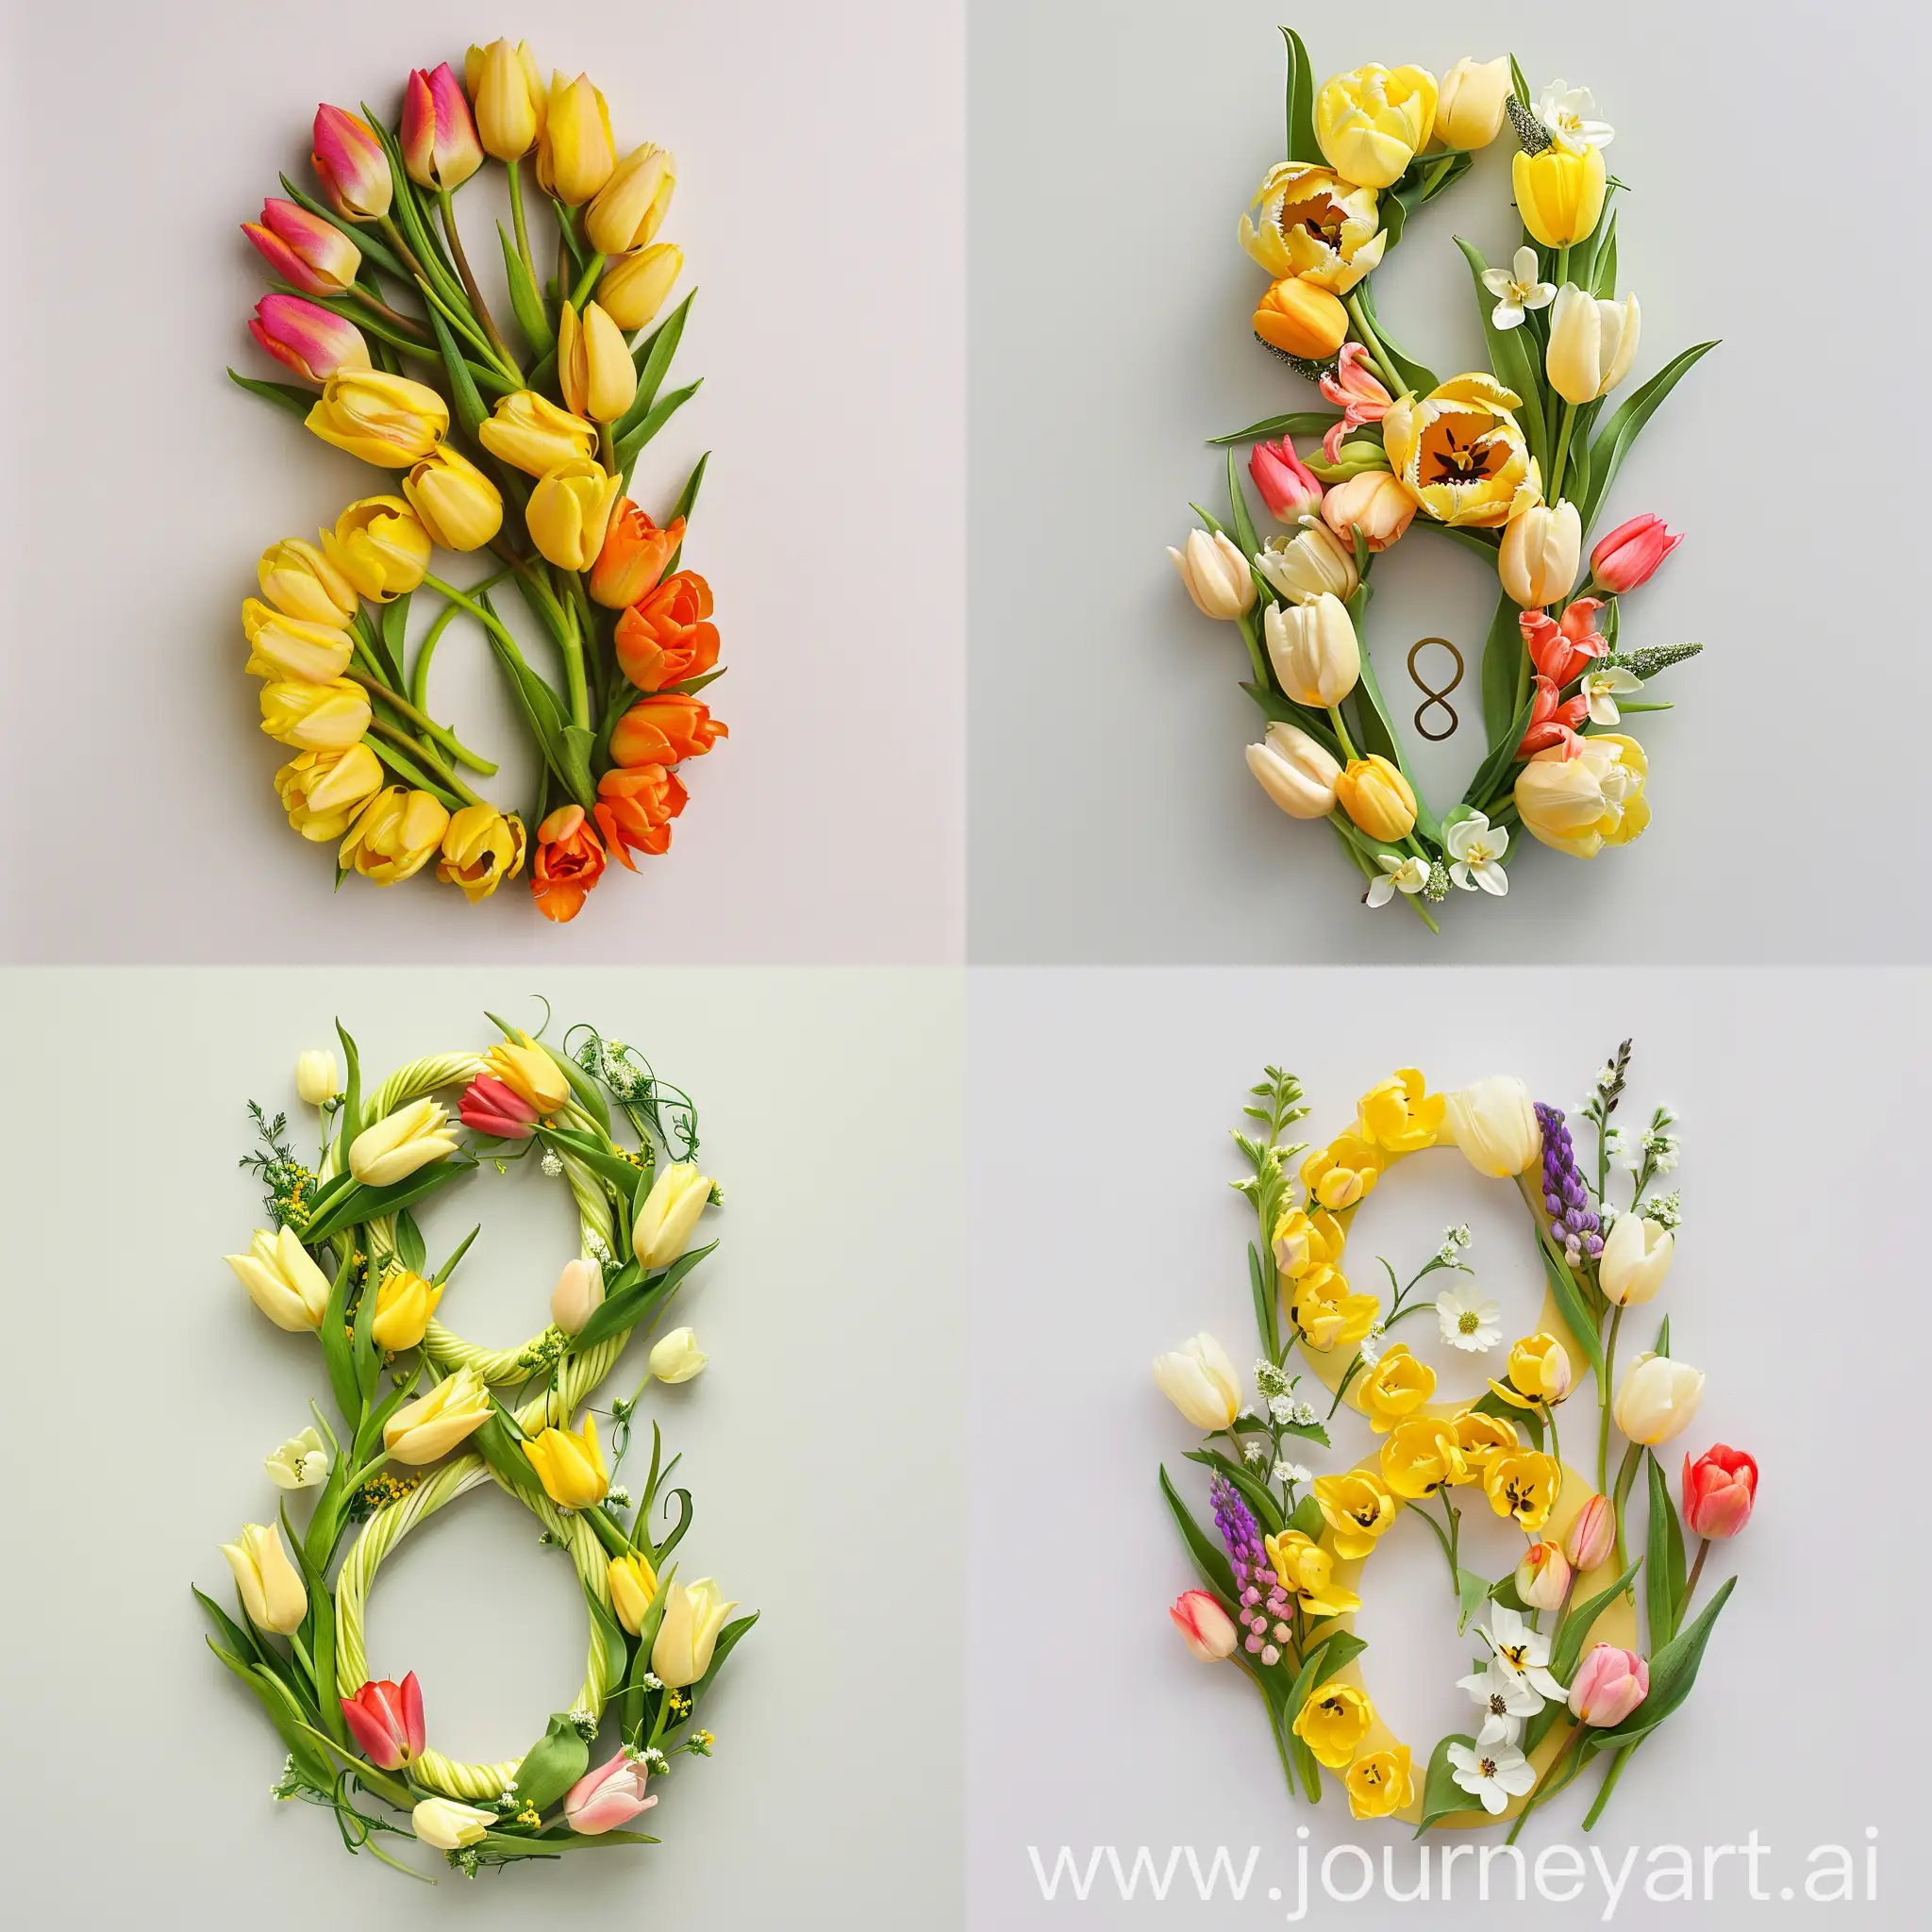 Vibrant-Yellow-Number-8-Floral-Arrangement-with-Spring-Flowers-and-Tulips